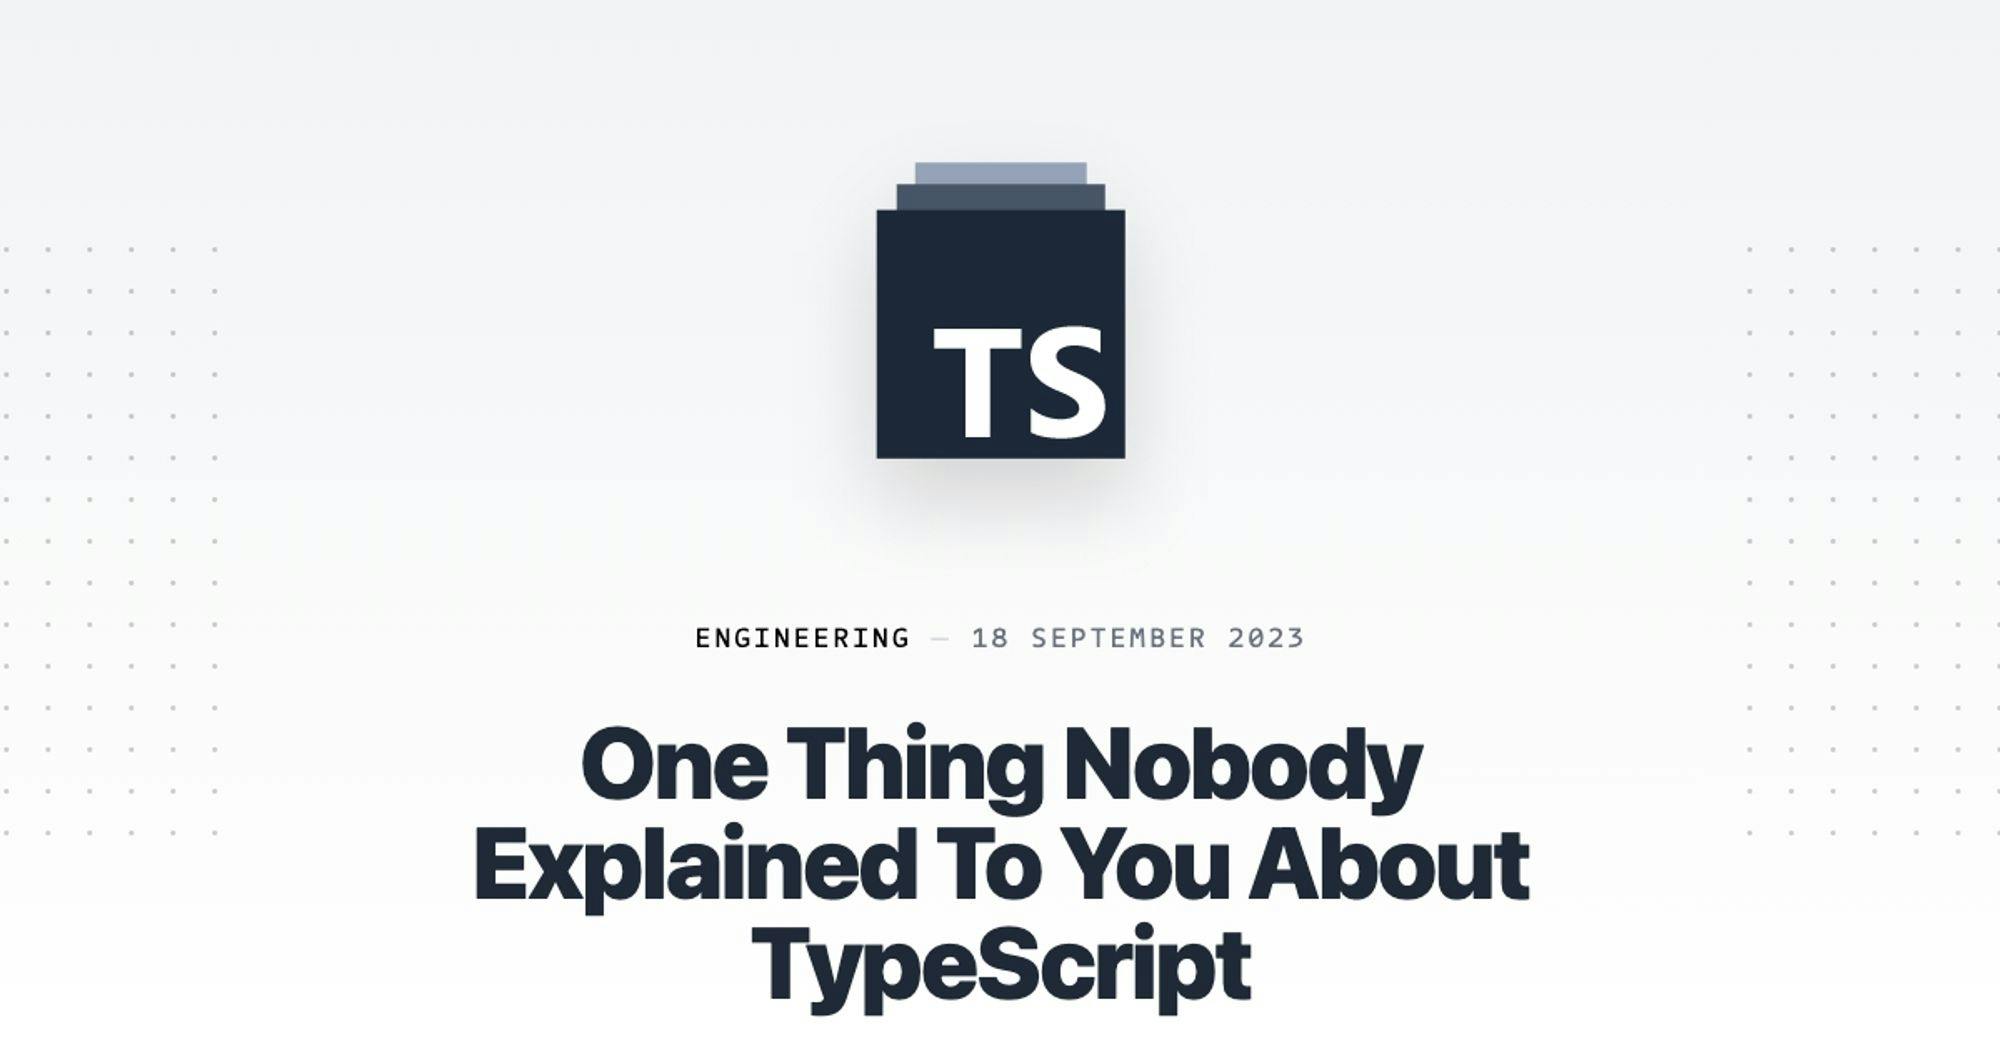 One Thing Nobody Explained To You About TypeScript